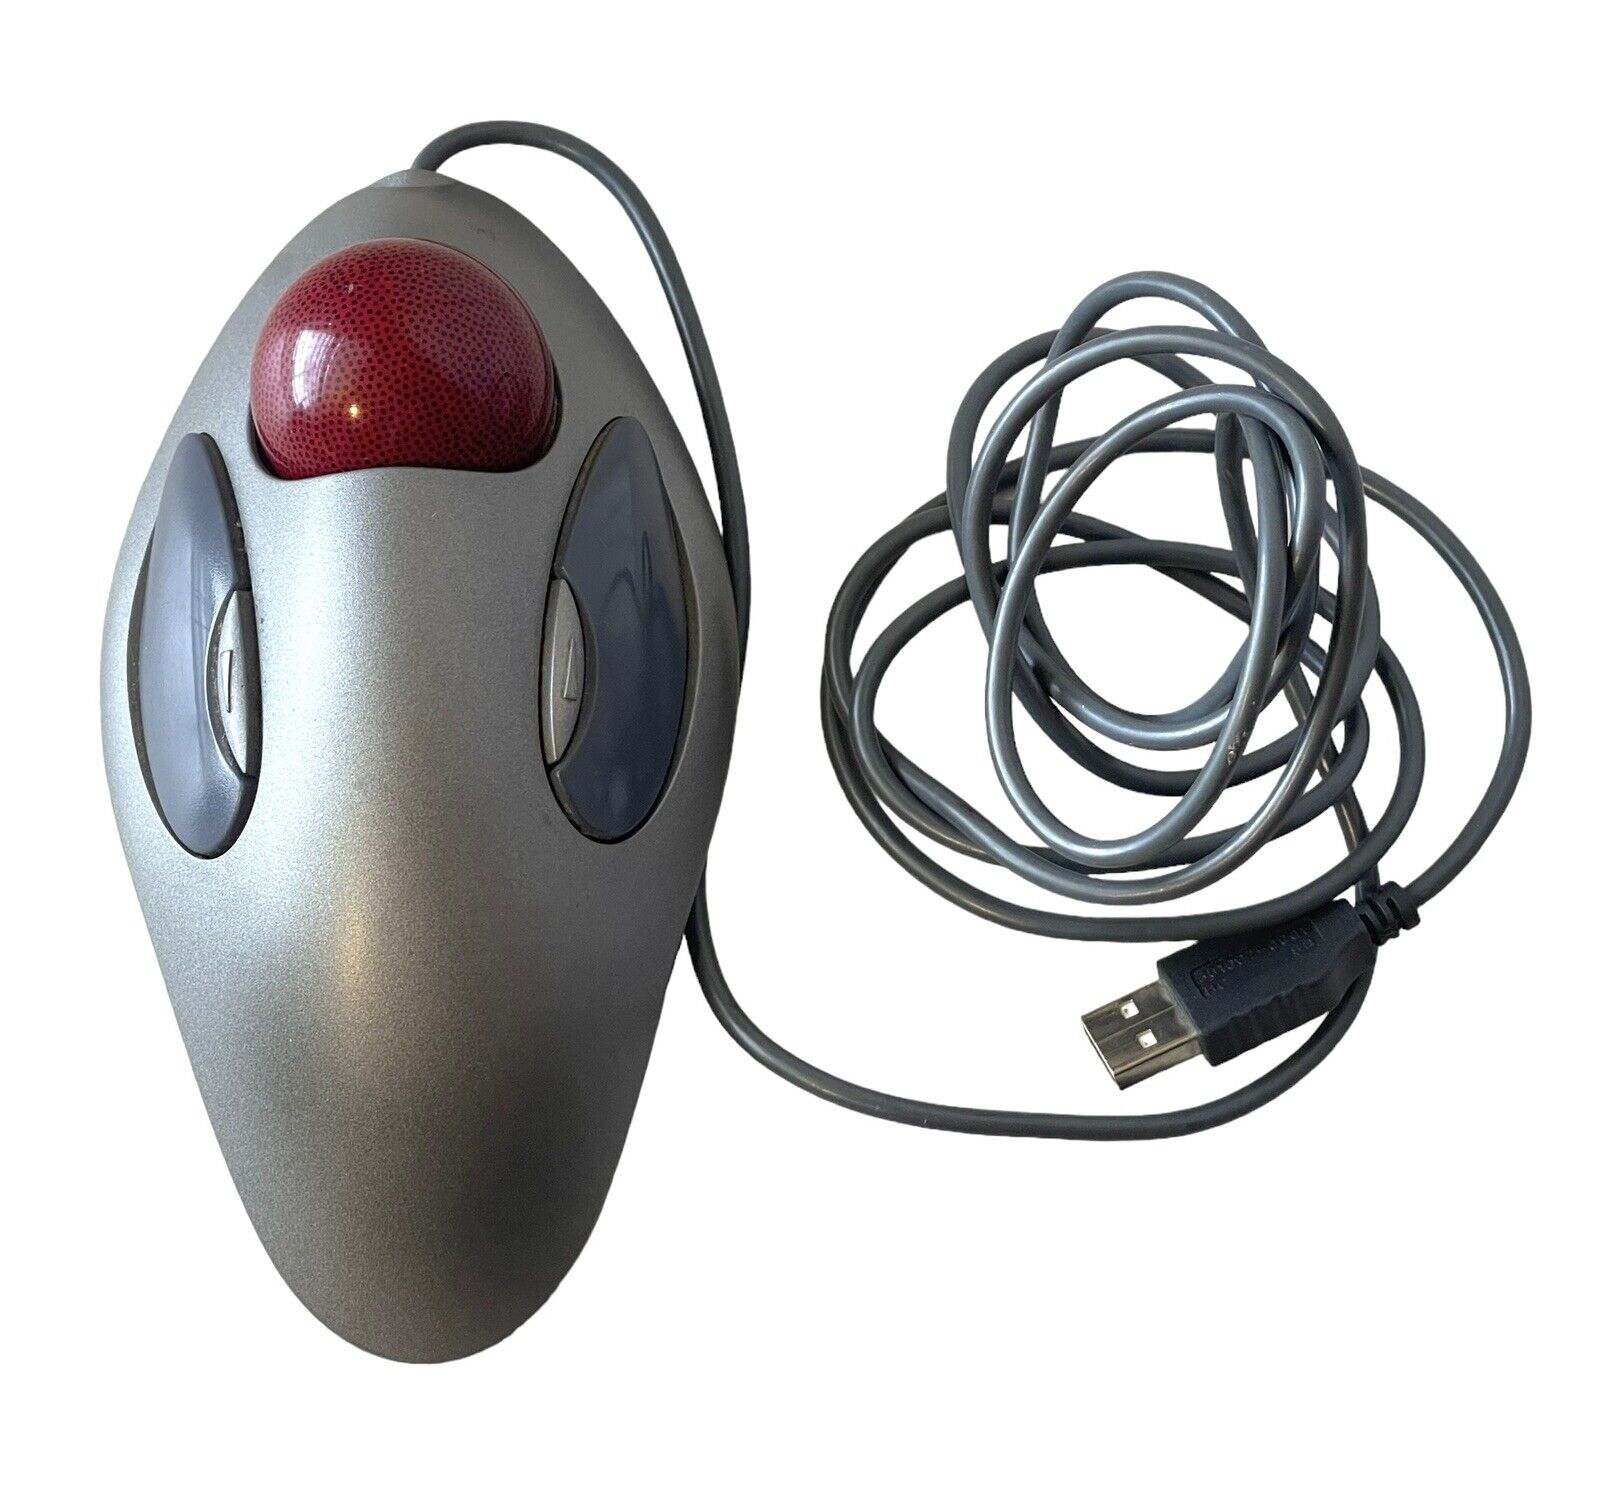 Logitech T-BC21 USB Wired Optical Trackman Marble Mouse Trackball Tested & Works